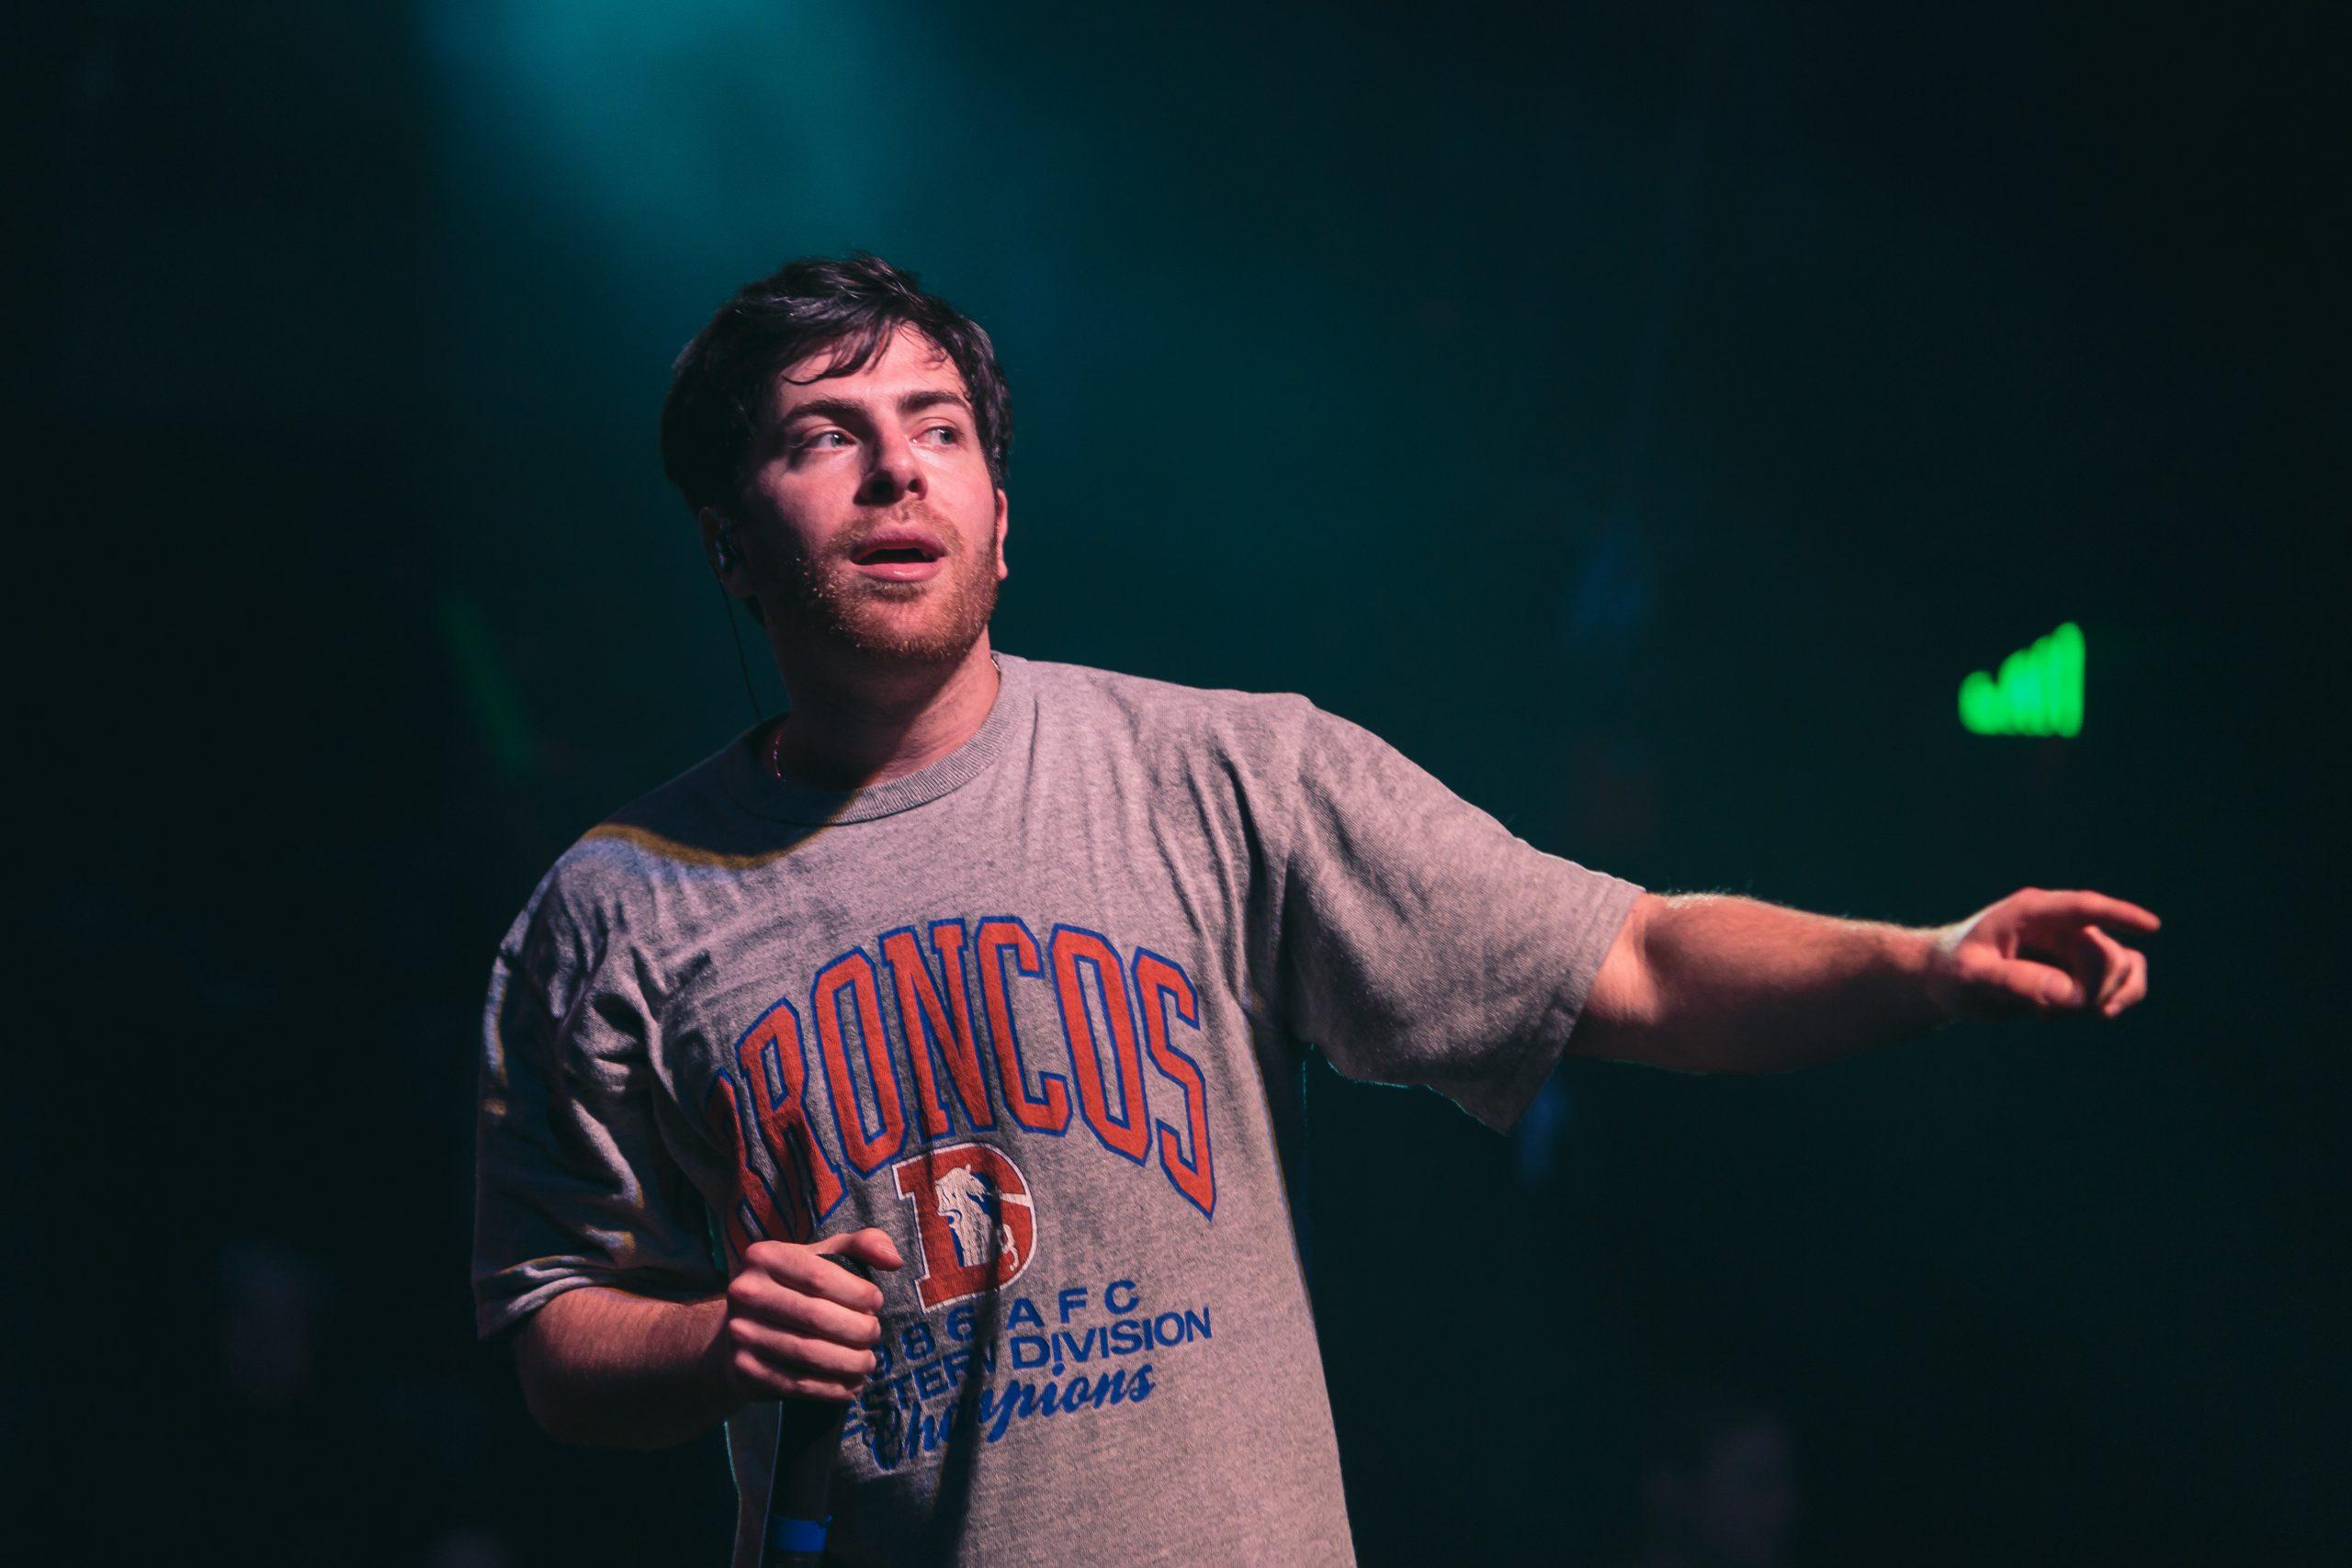 Hoodie+Allen%E2%80%99s+performance+at+the+Aggie+Theater+Friday+night+marked+his+second+stop+in+Colorado+after+Denver+on+his+%E2%80%9CHanging+with+Hoodie%E2%80%9D+tour.